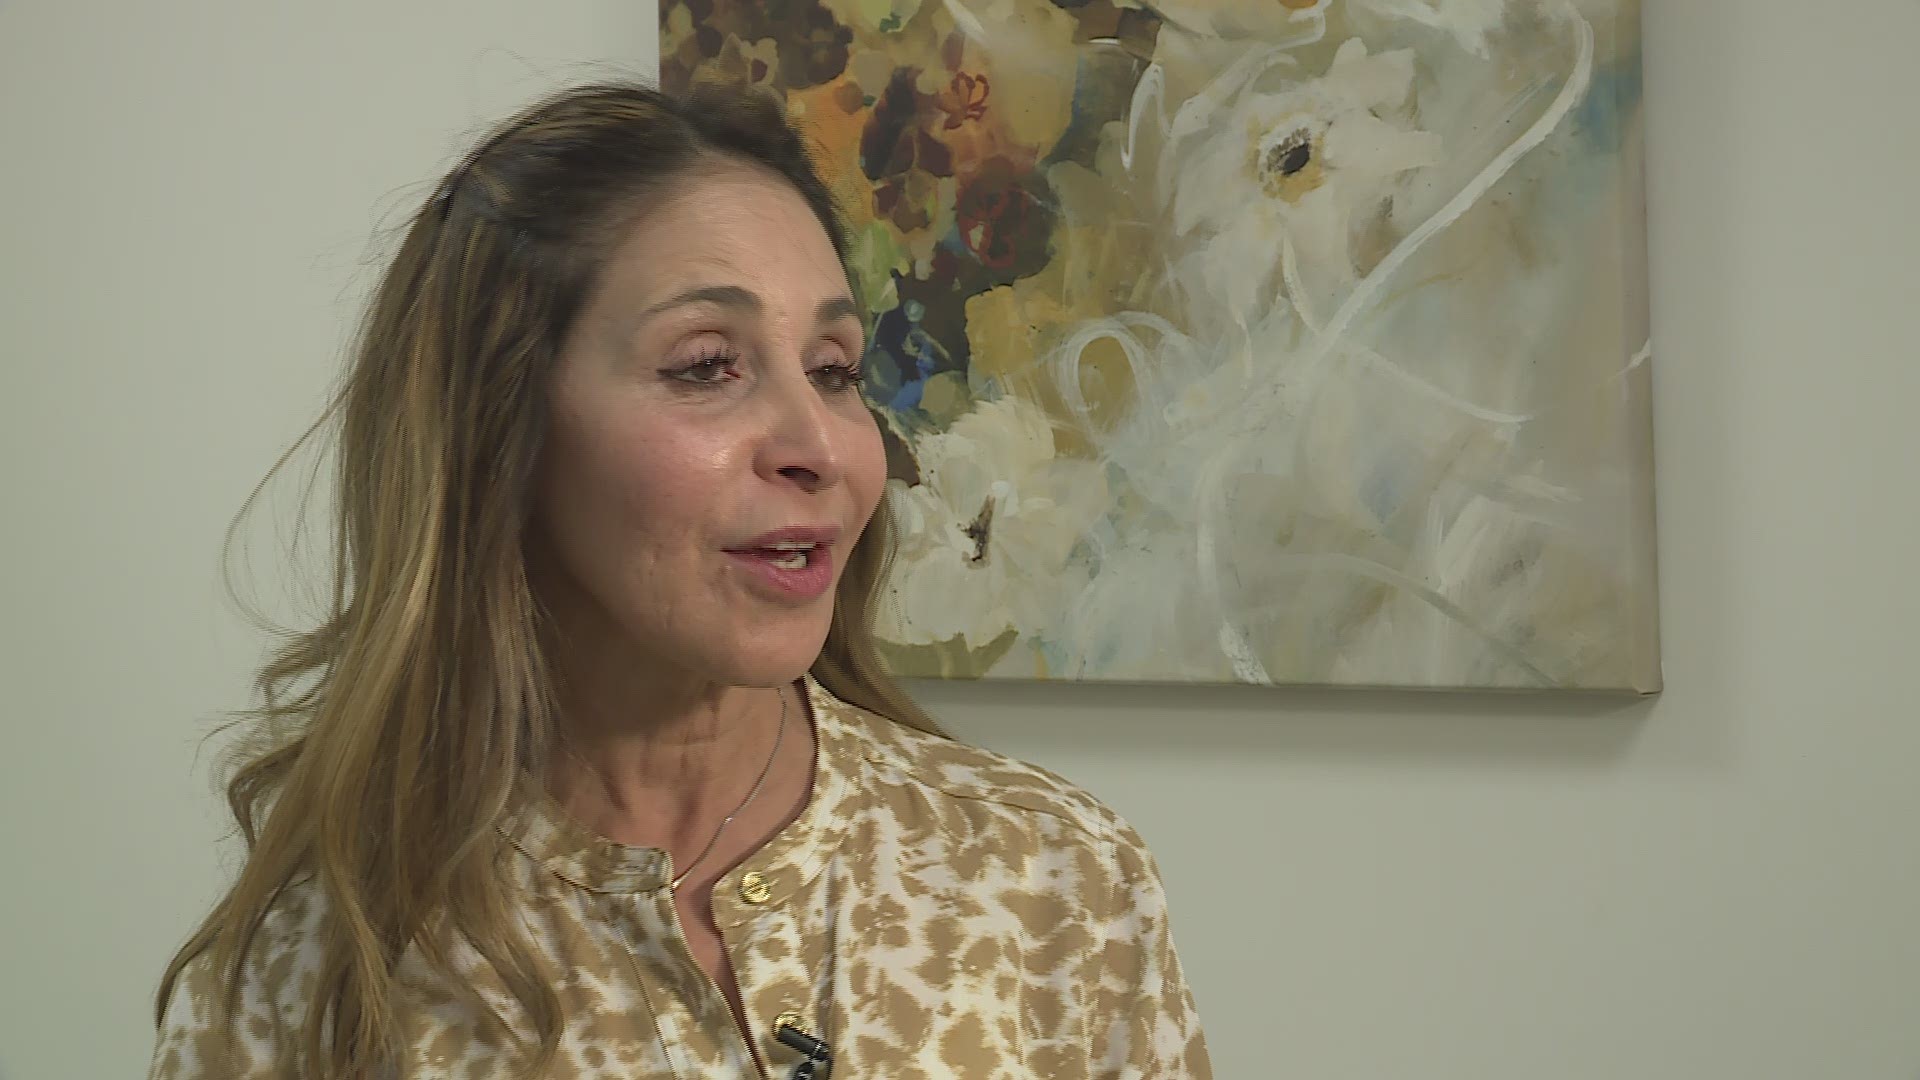 Dr. Gloria Roman discusses why she'll receive a full facelift surgery live on WKYC.com this week.